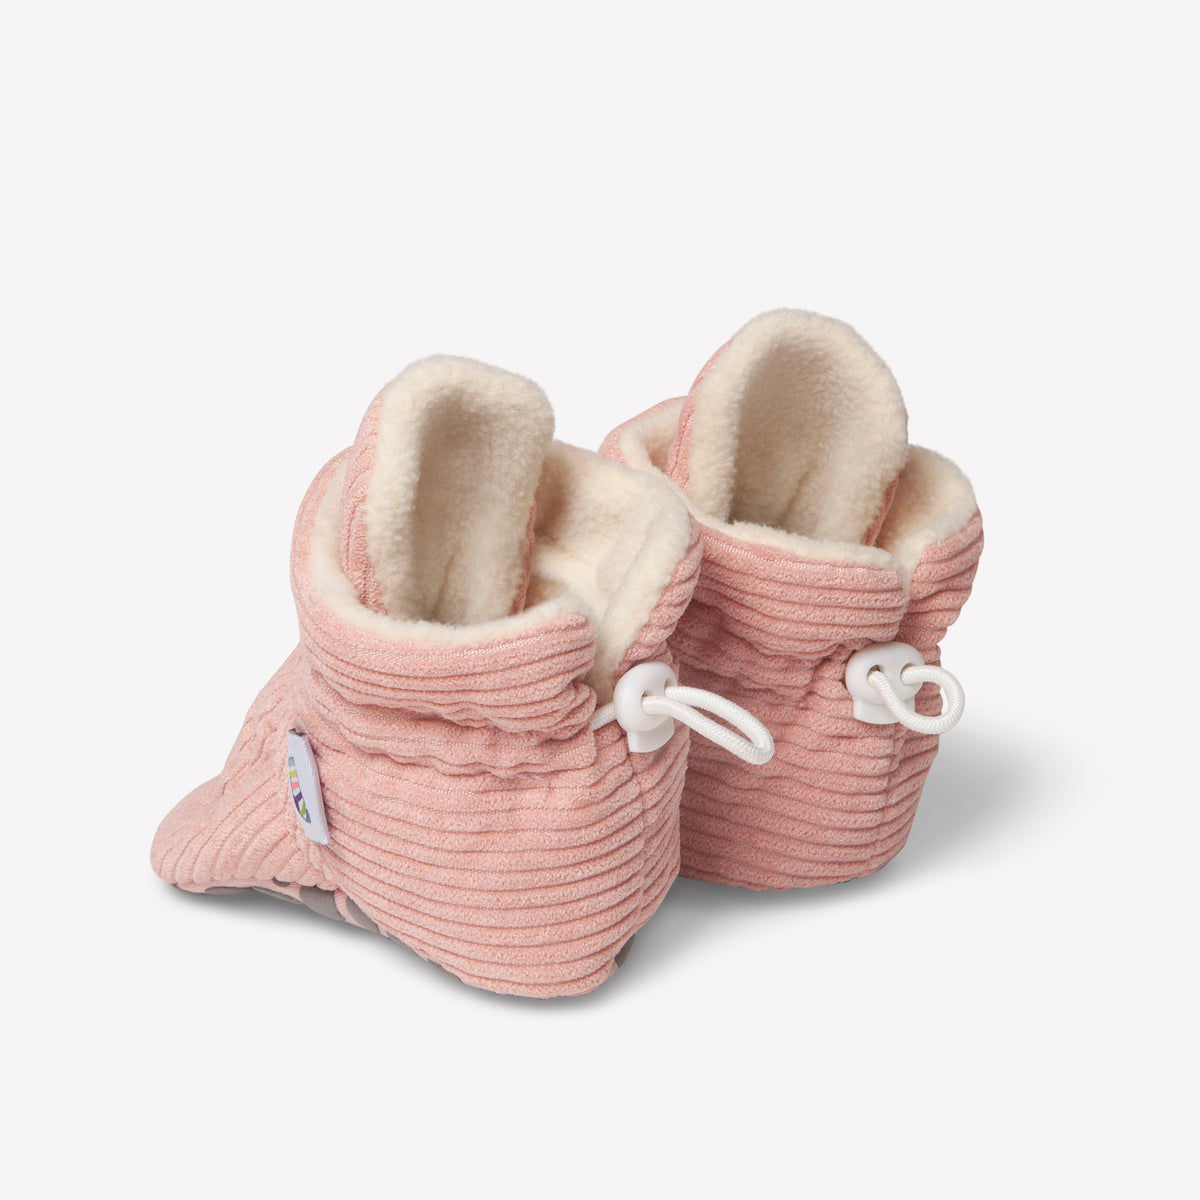 Stay-on, Non-Slip Booties - Perfect pram Slipper or Baby Carrier boot - Rose Corduroy